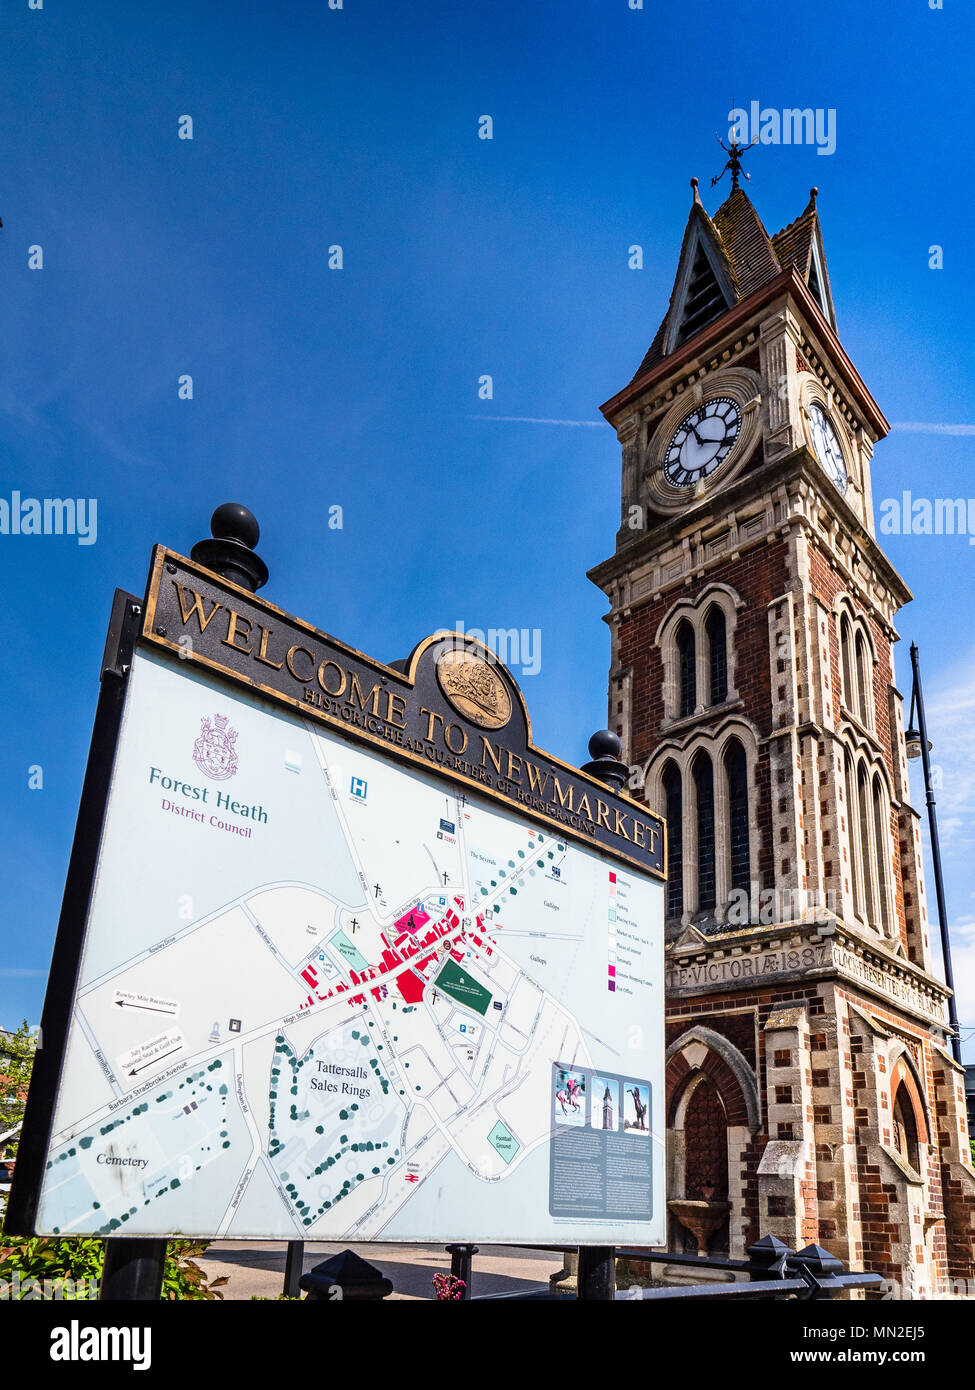 Welcome to Newmarket - Newmarket Tourism - Clock tower and sign in the High Street in Newmarket Suffolk. Built 1887 for Victoria's Diamond Jubilee Stock Photo